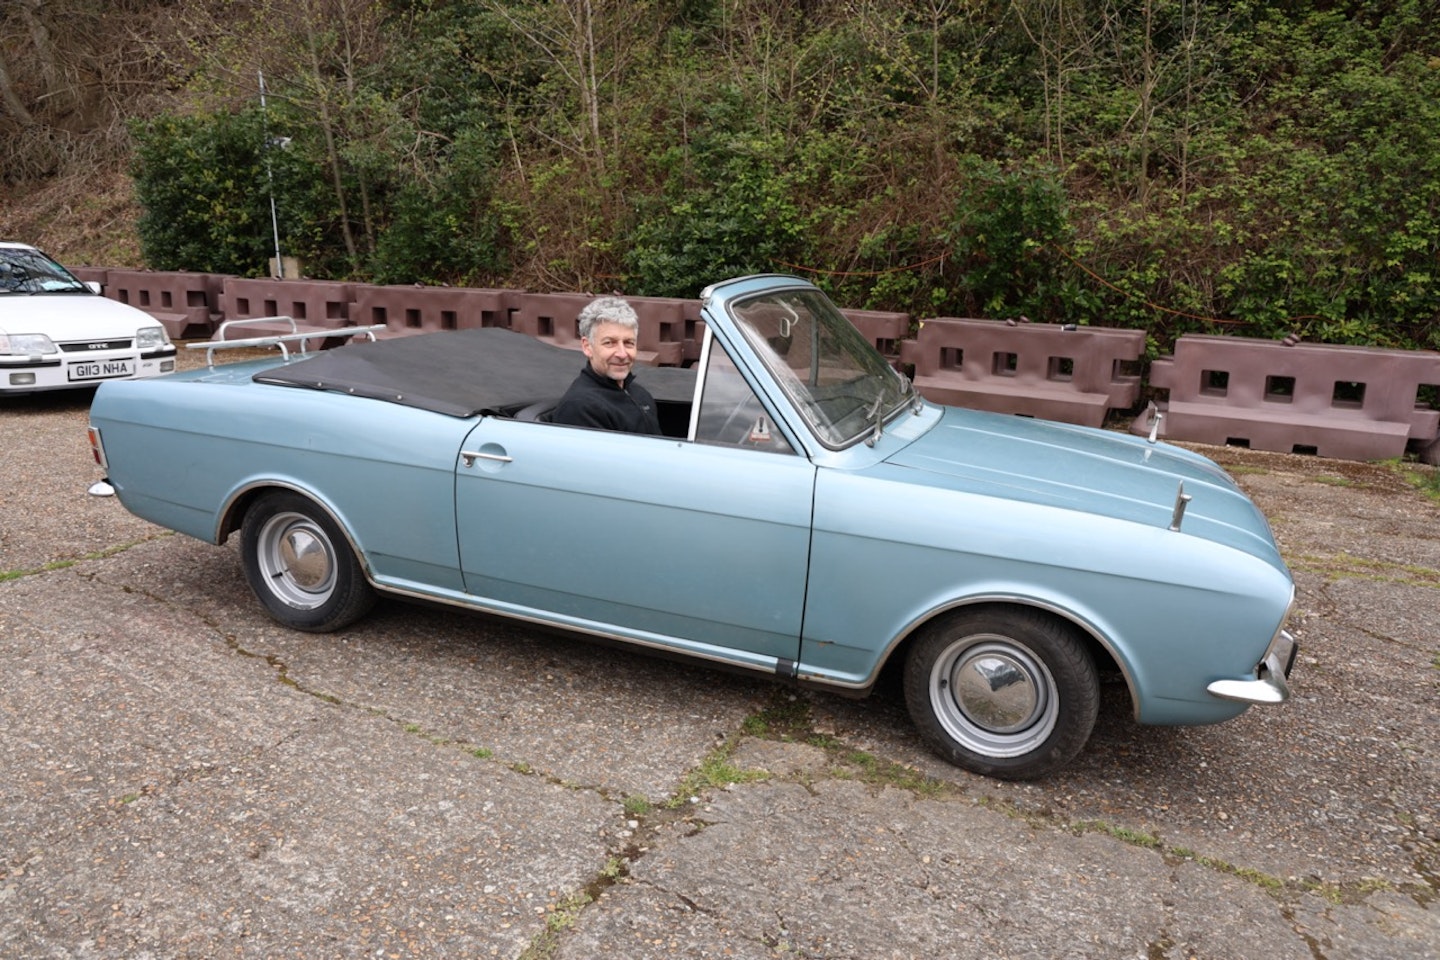 Nick Butcher of Weybridge had a Crayford Ford Cortina convertible before, but it was stolen, so he was pleased to find this 1969 1600 auto replacement.